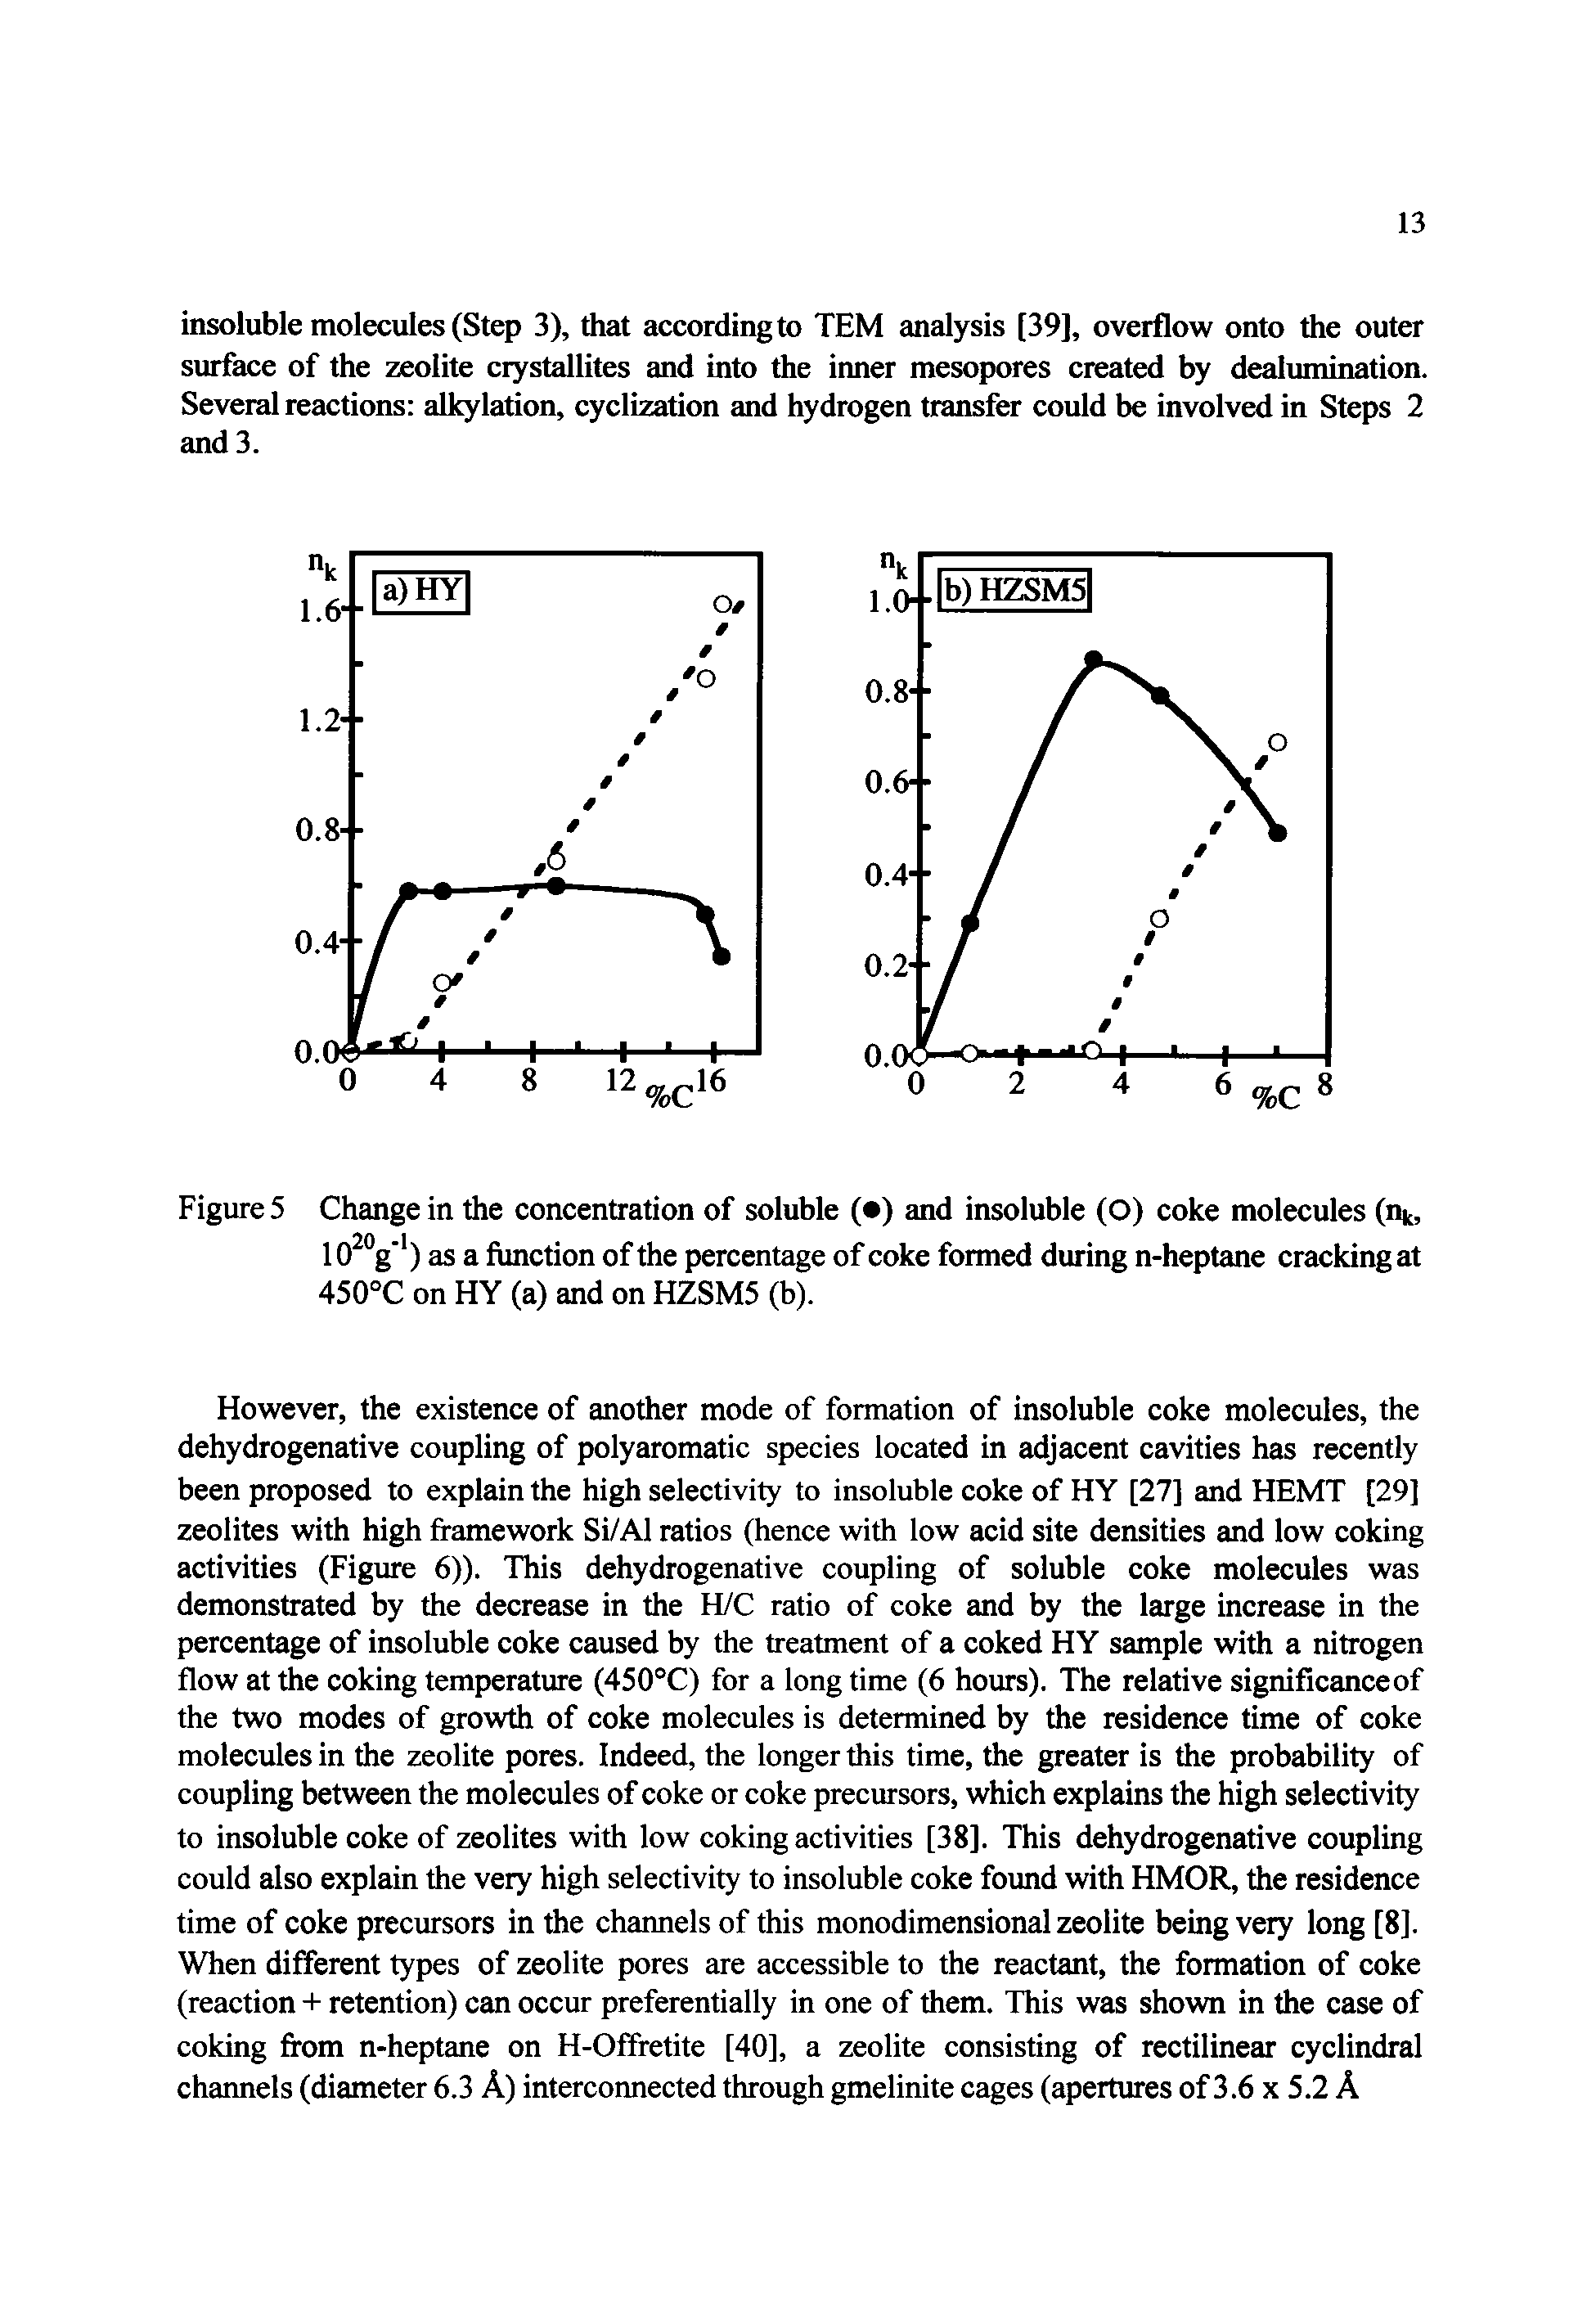 Figure 5 Change in the concentration of soluble ( ) and insoluble (O) coke molecules (n, lO V ) as a fimction of the percentage of coke formed during n-heptane cracking at 450°C on HY (a) and on HZSM5 (b).